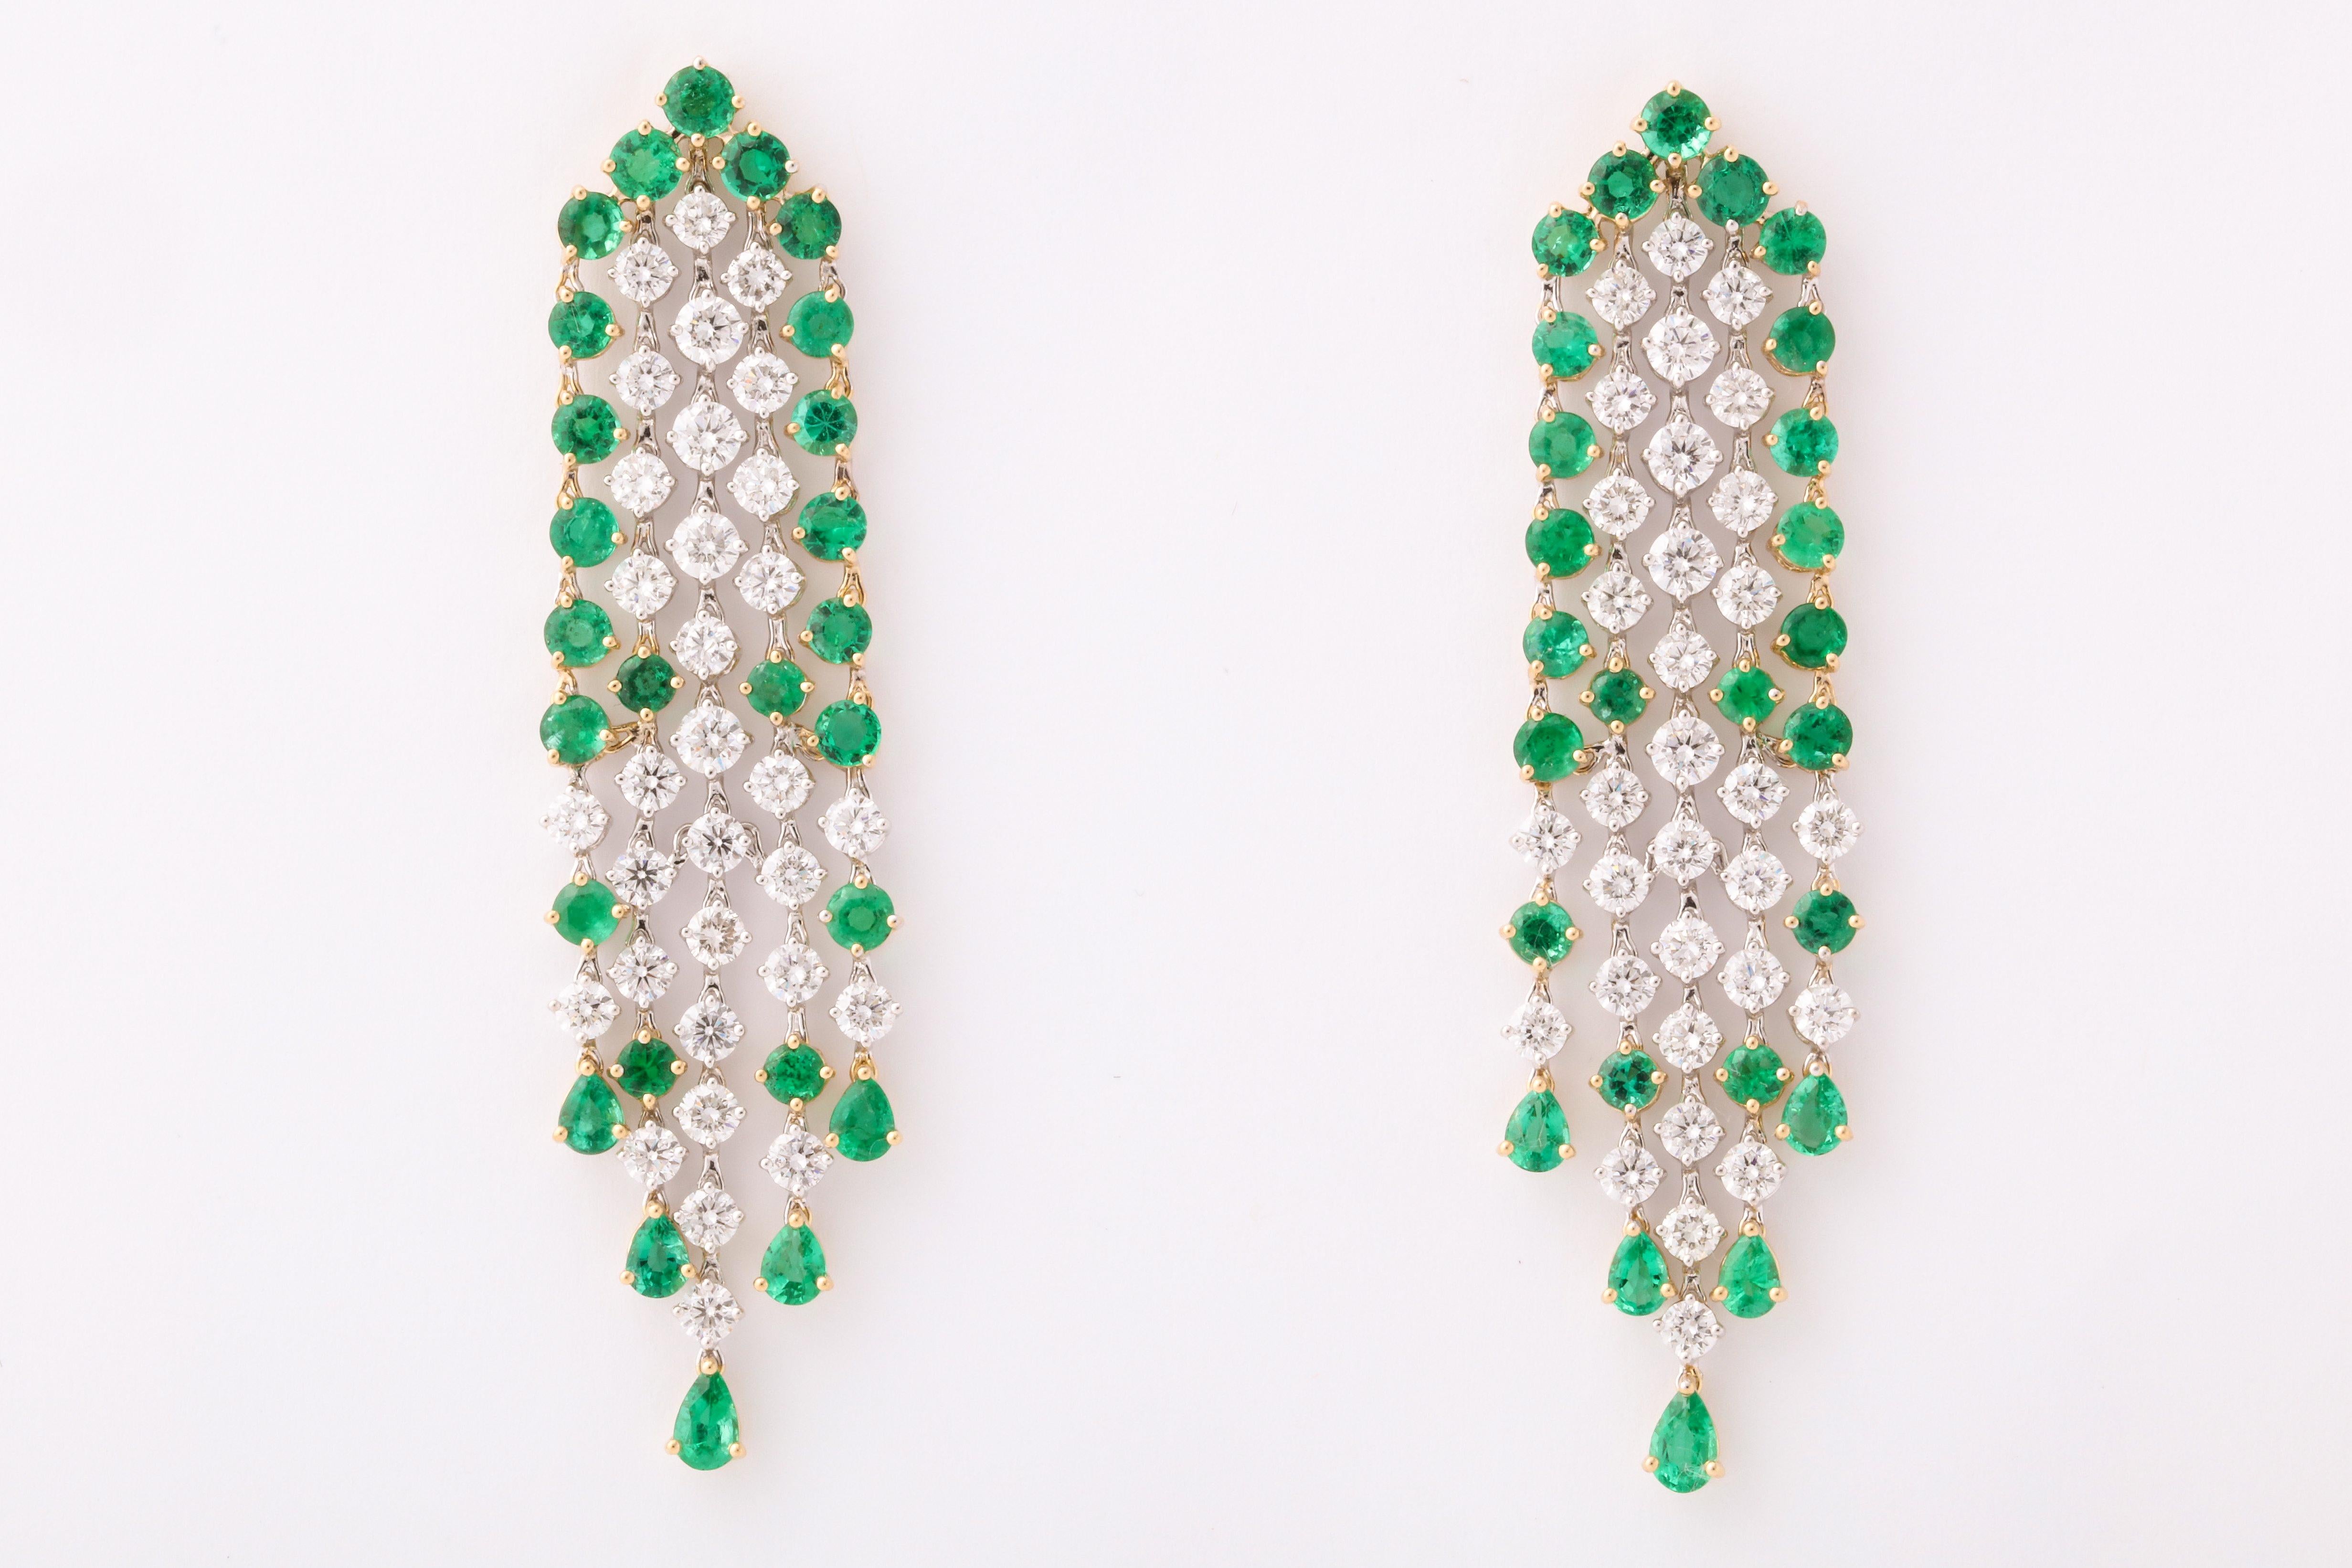 
An beautiful earring with fantastic movement.

6.19 carats of white round brilliant cut diamonds 

7.00 carats of fine vivid green round and pear shaped emeralds. 

18k white and yellow gold. 

Approximately 2.55 inches long and .60 inches wide. 